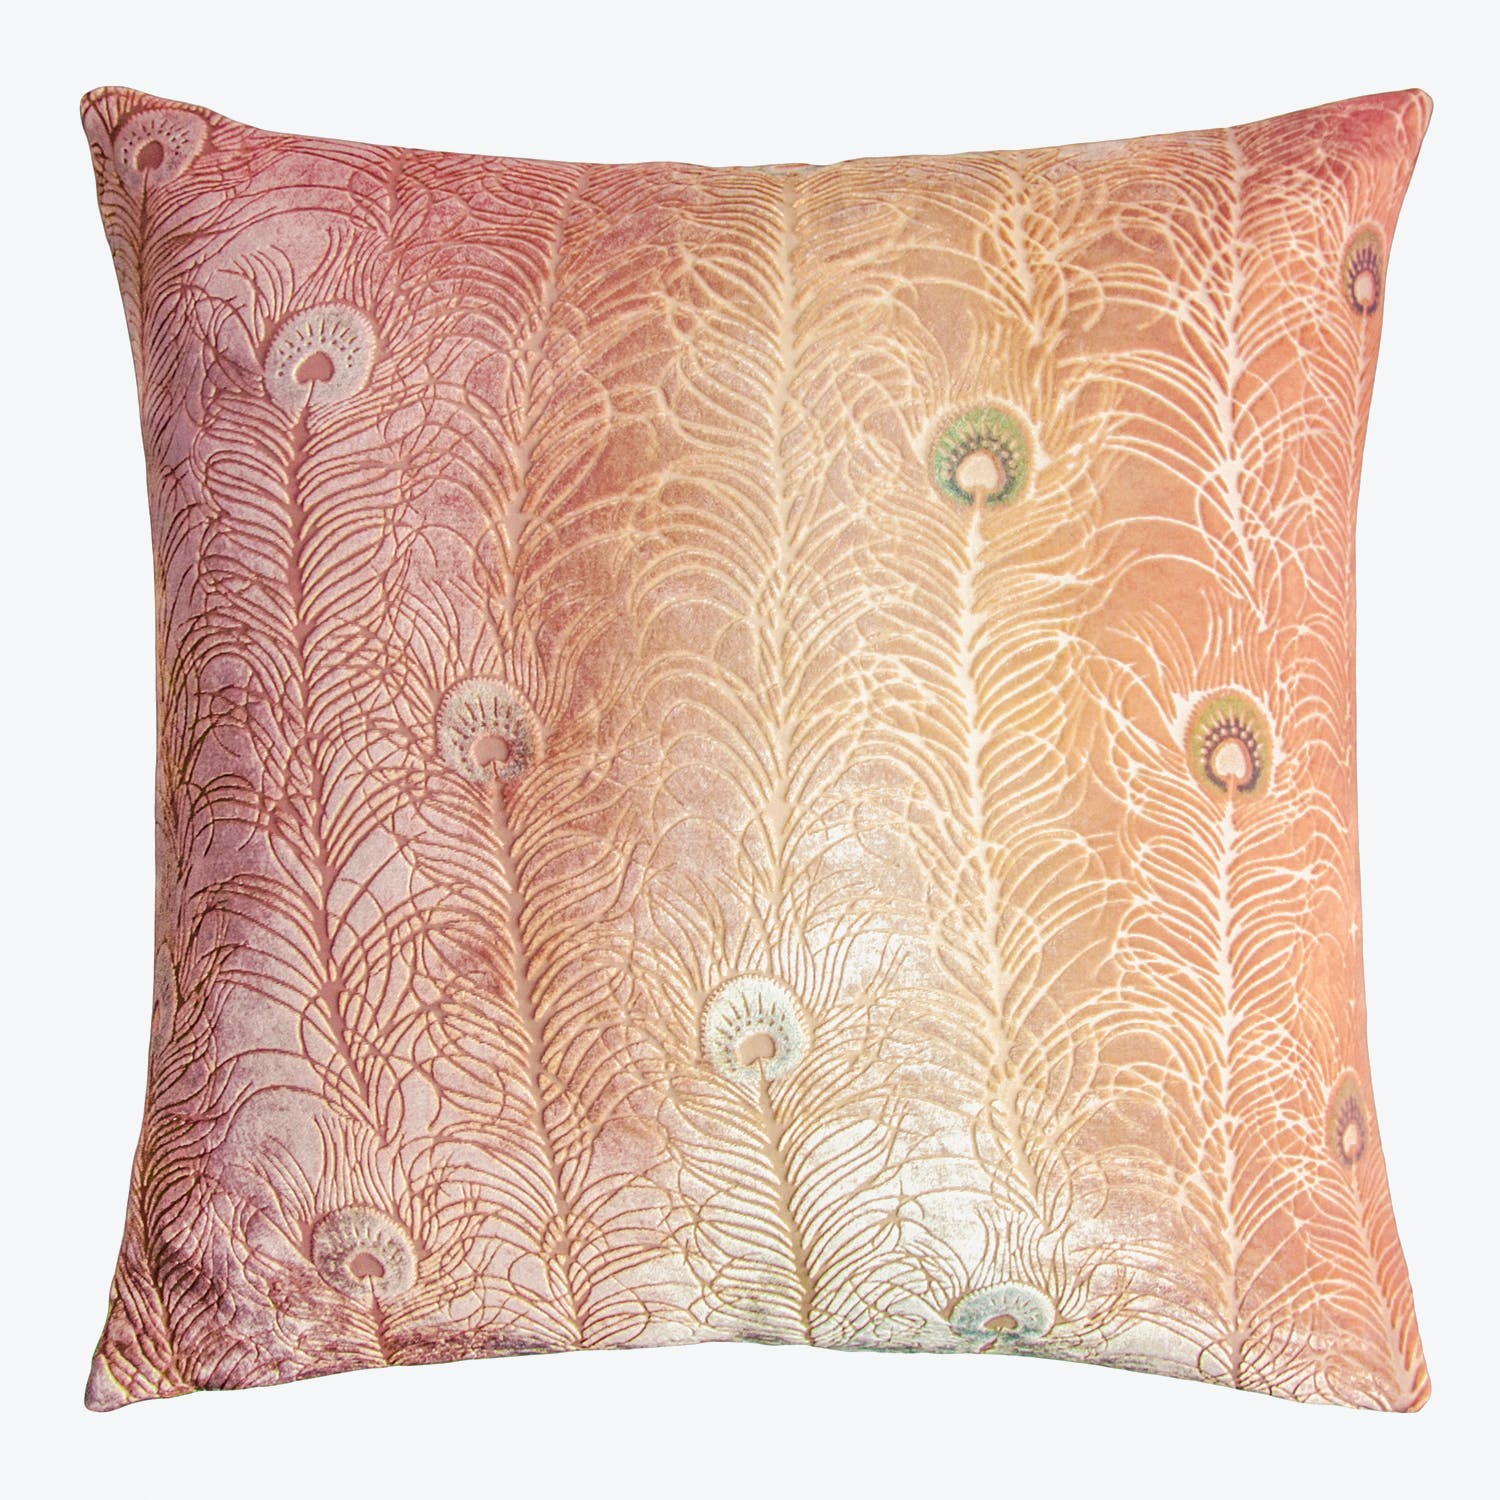 Square decorative pillow with botanical motif and peacock feather-like pattern in warm gradient tones.